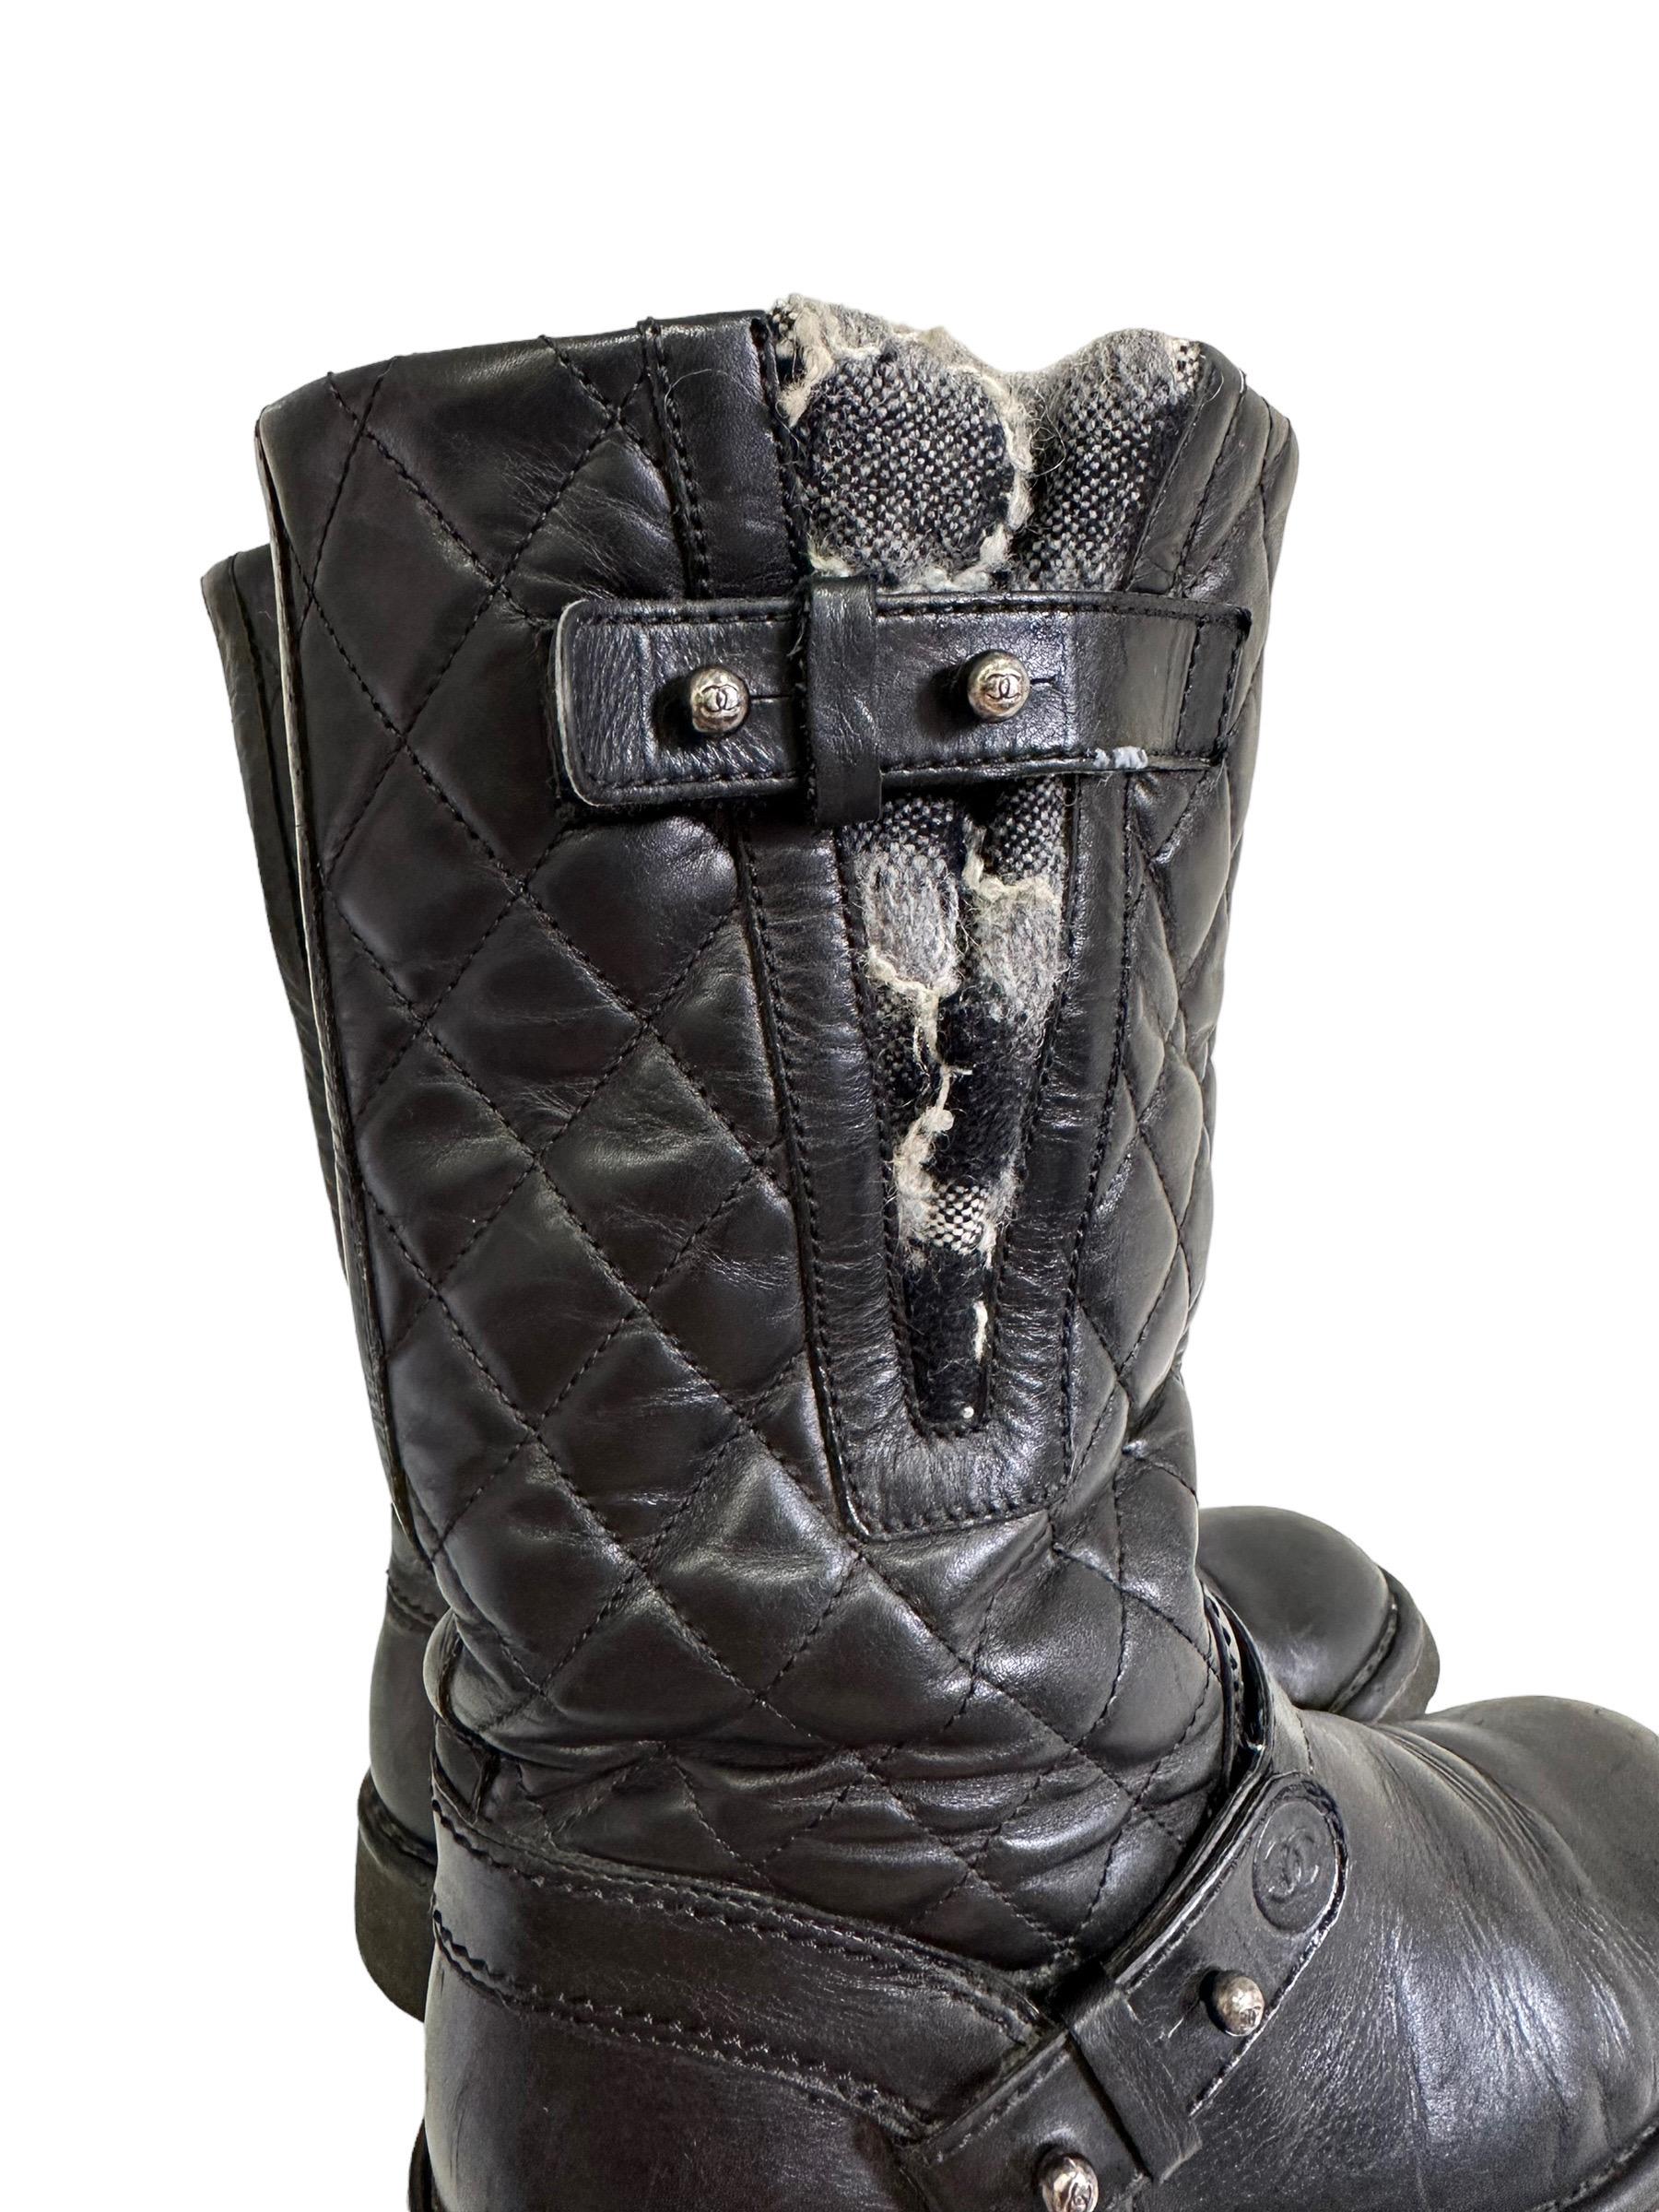 Chanel Biker Boots Black Leather Tweed For Sale 4